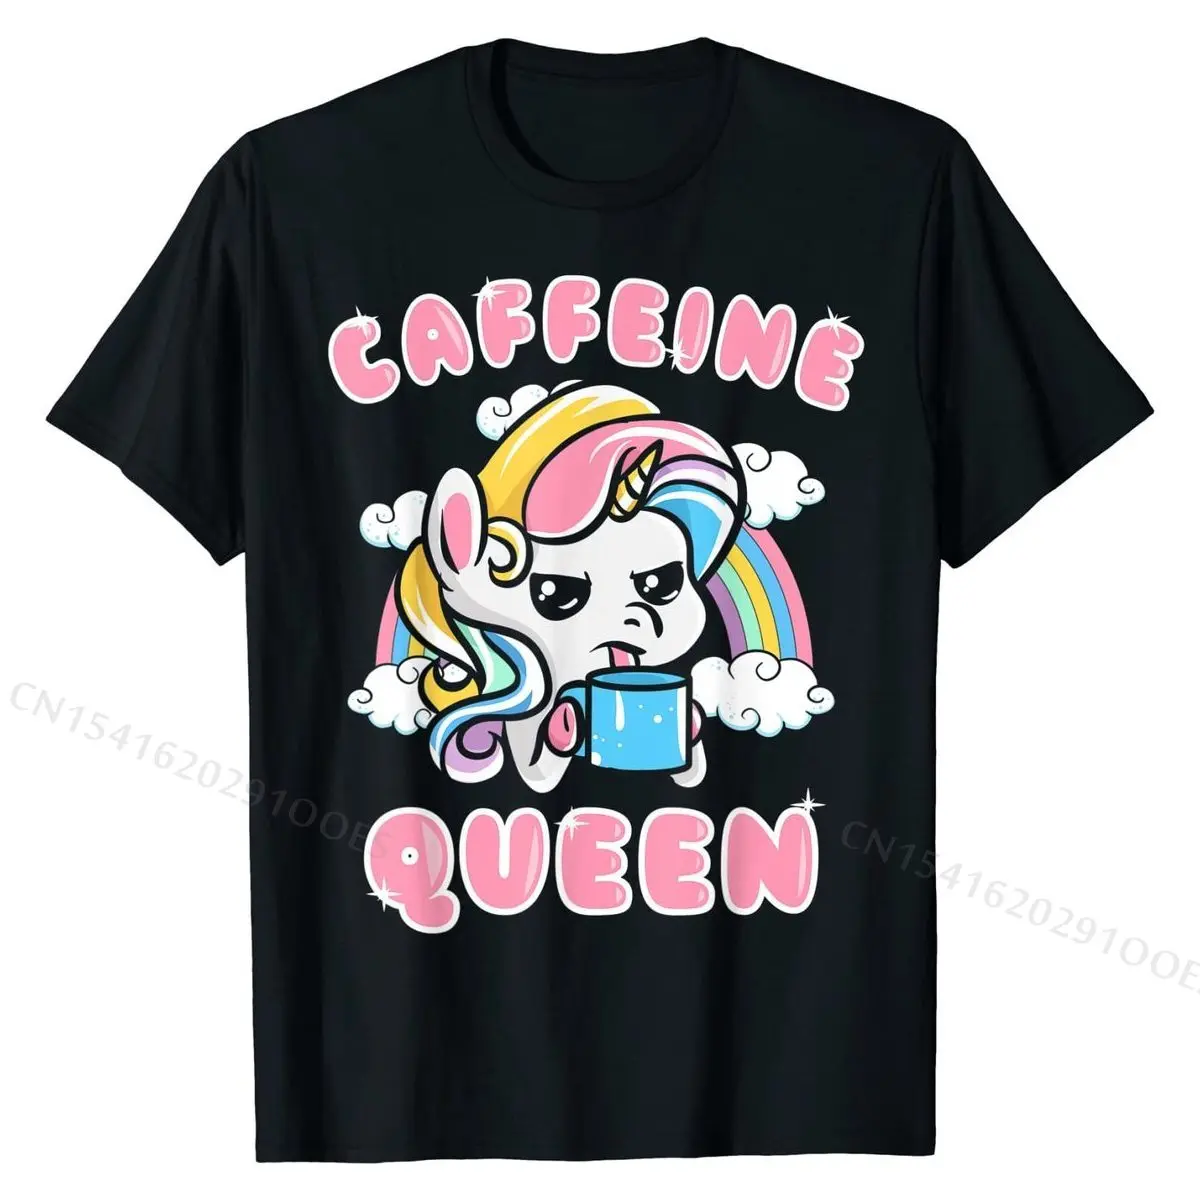 

Unicorn Caffeine Queen Coffee Humor Quotes Sayings Gift T-Shirt Party Tops Shirt for Men Cheap Cotton Top T-shirts Printing